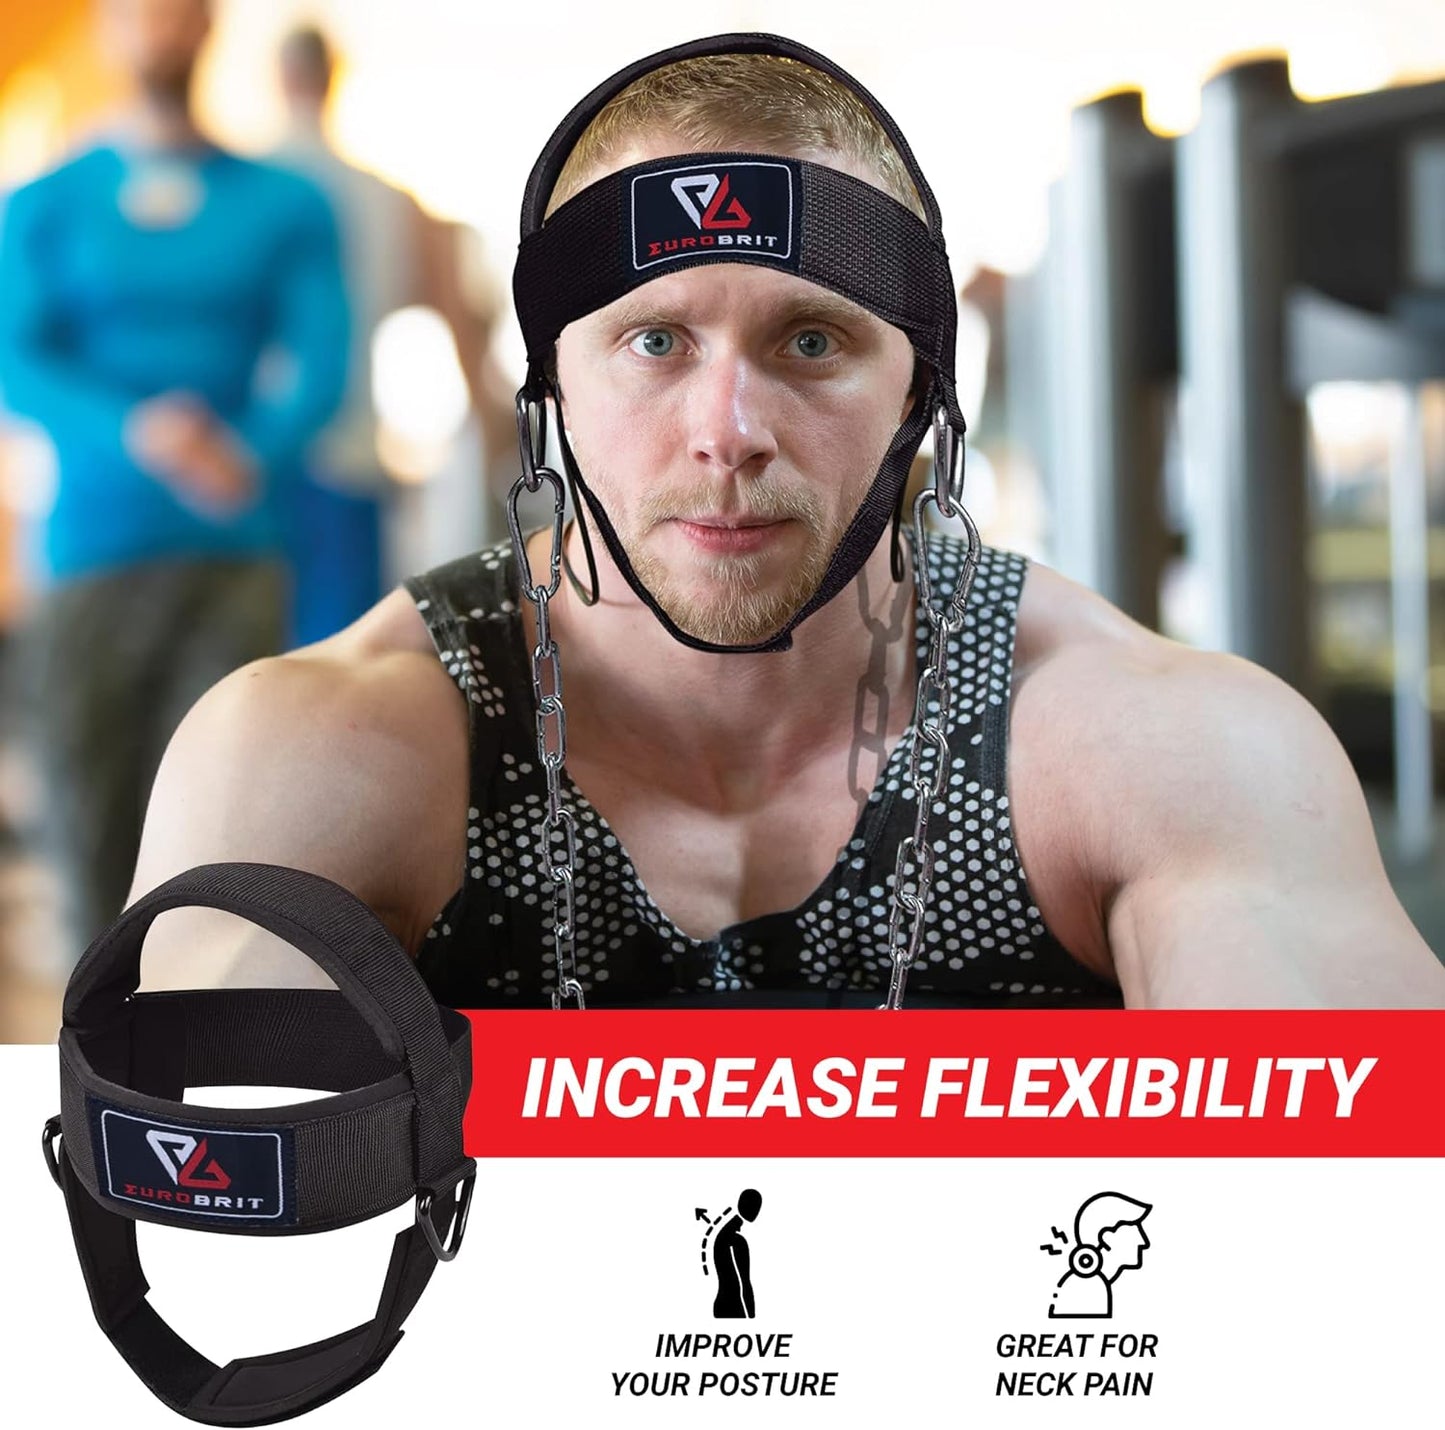 Eurobrit Neck Trainer and Harness for Weight Lifting